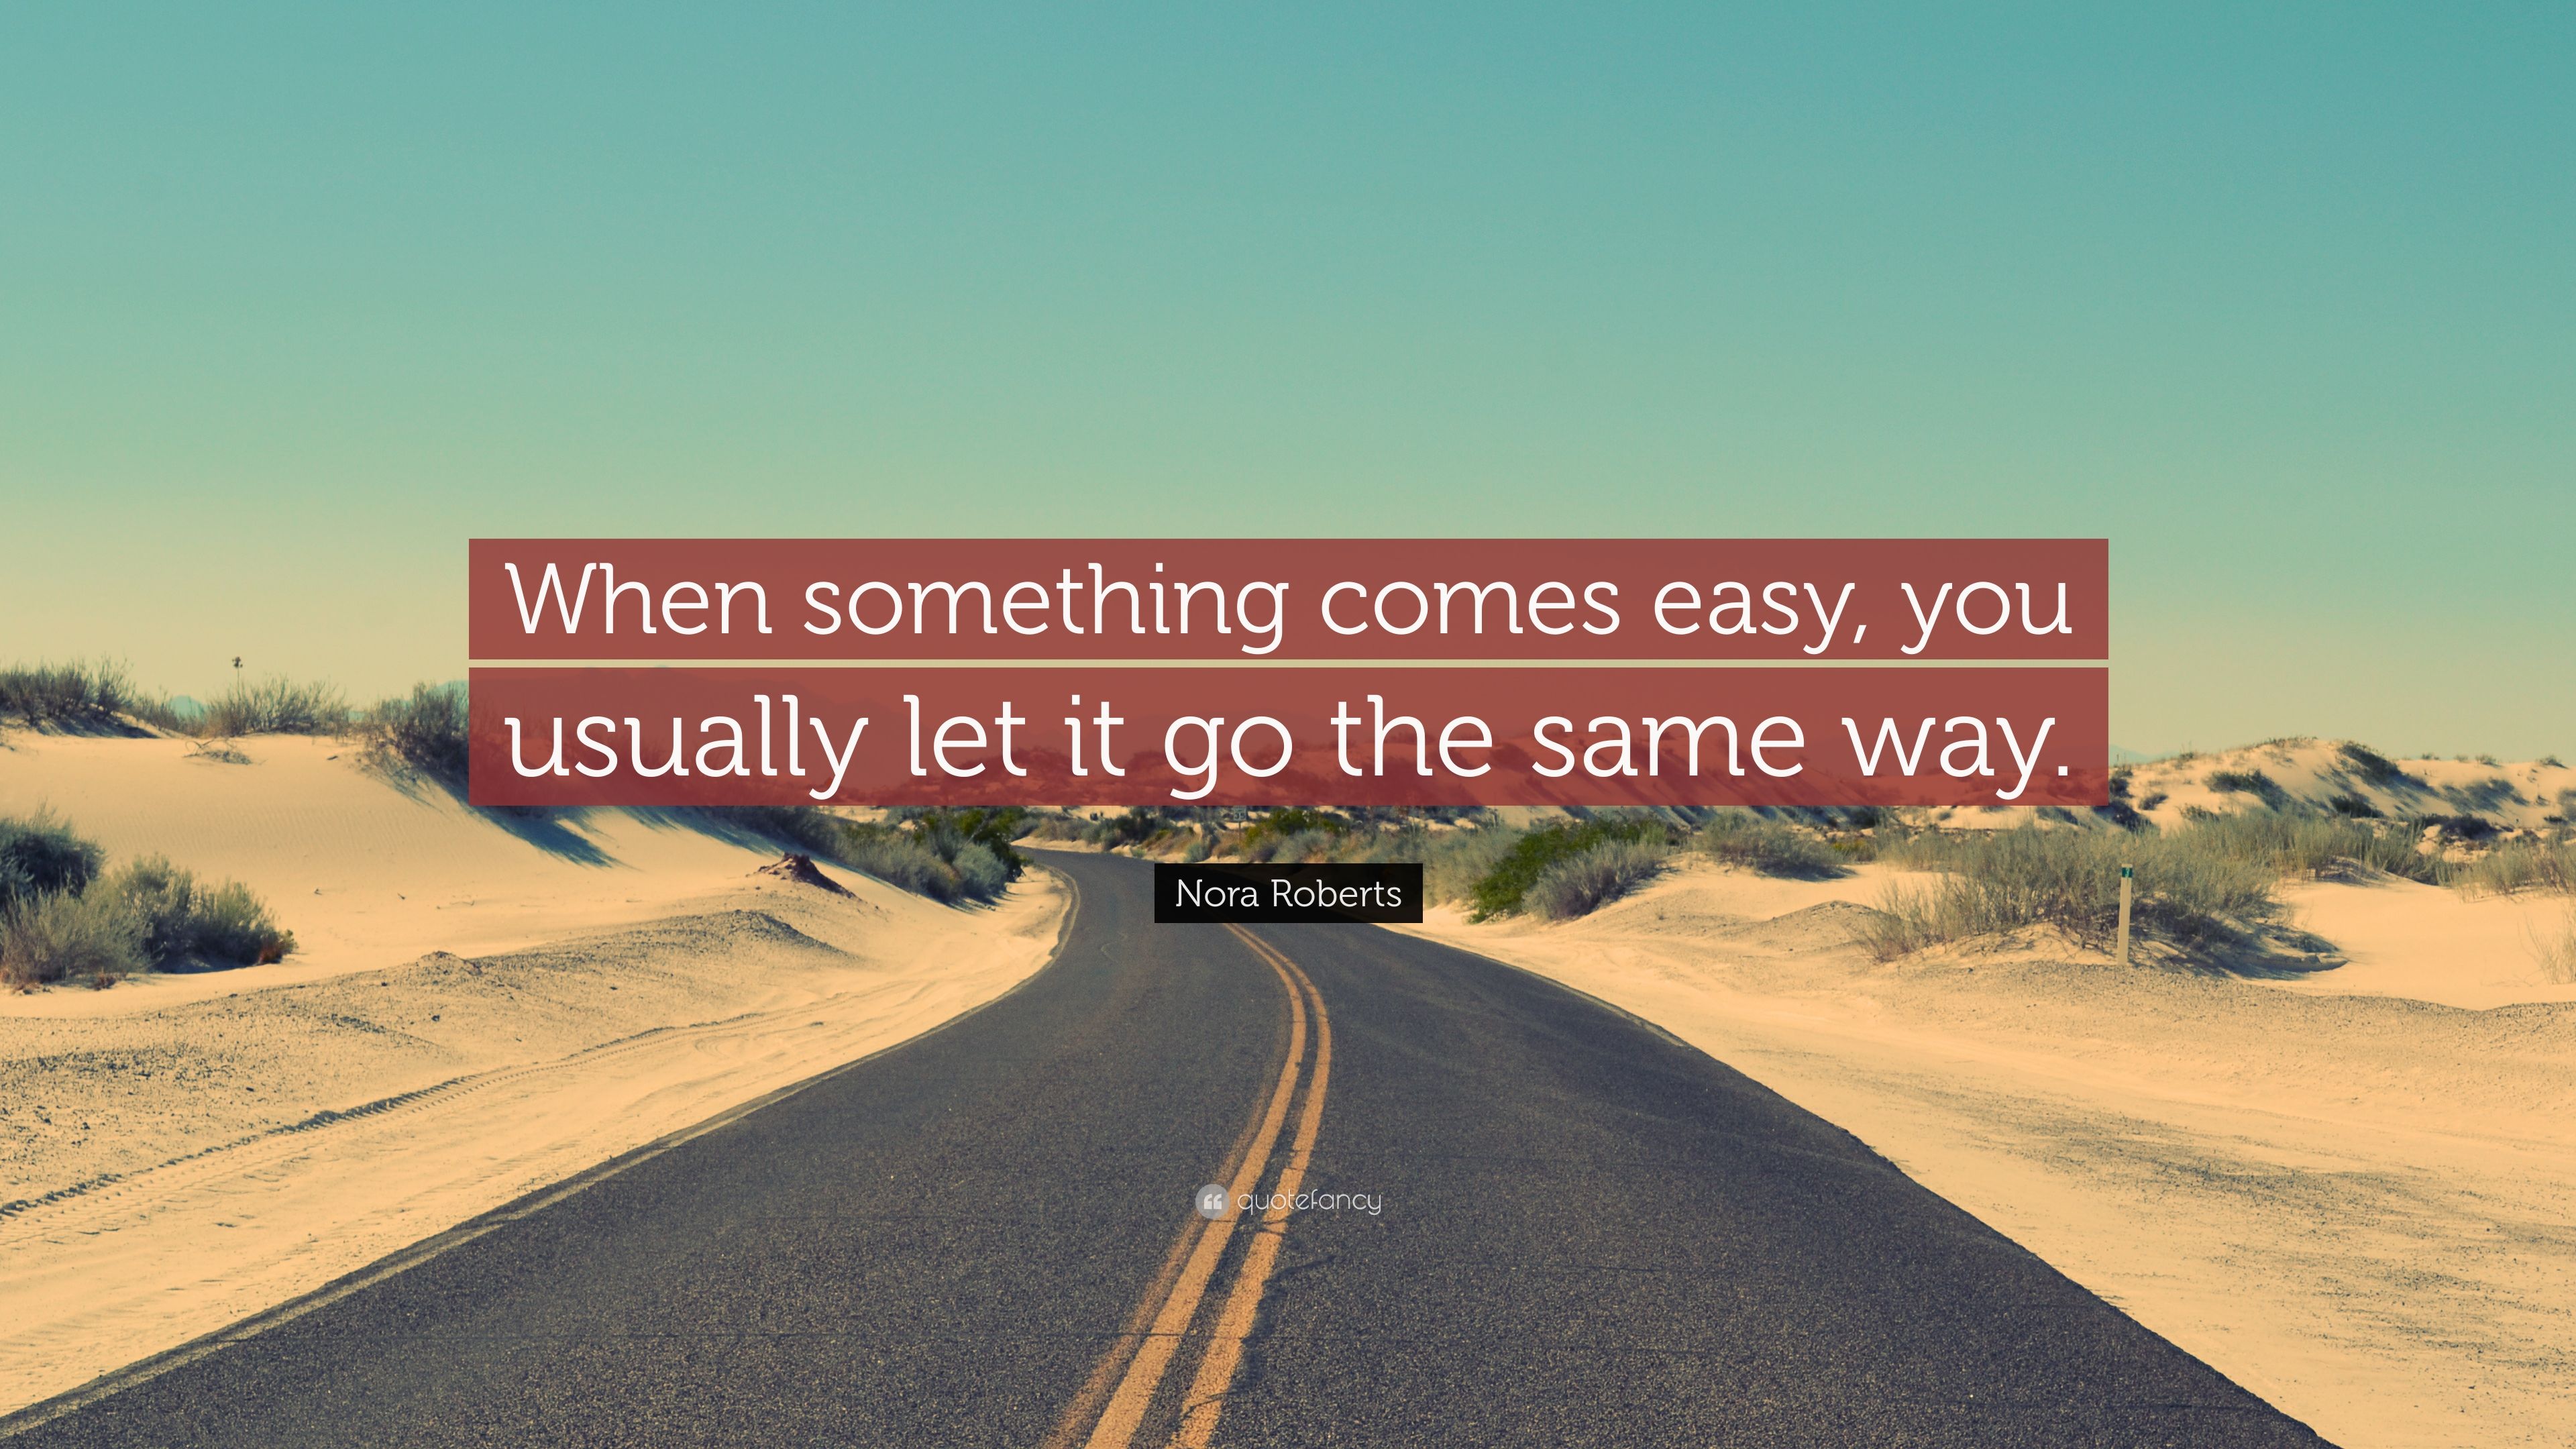 Nora Roberts Quote: “When something comes easy, you usually let it go the same way.” (7 wallpaper)